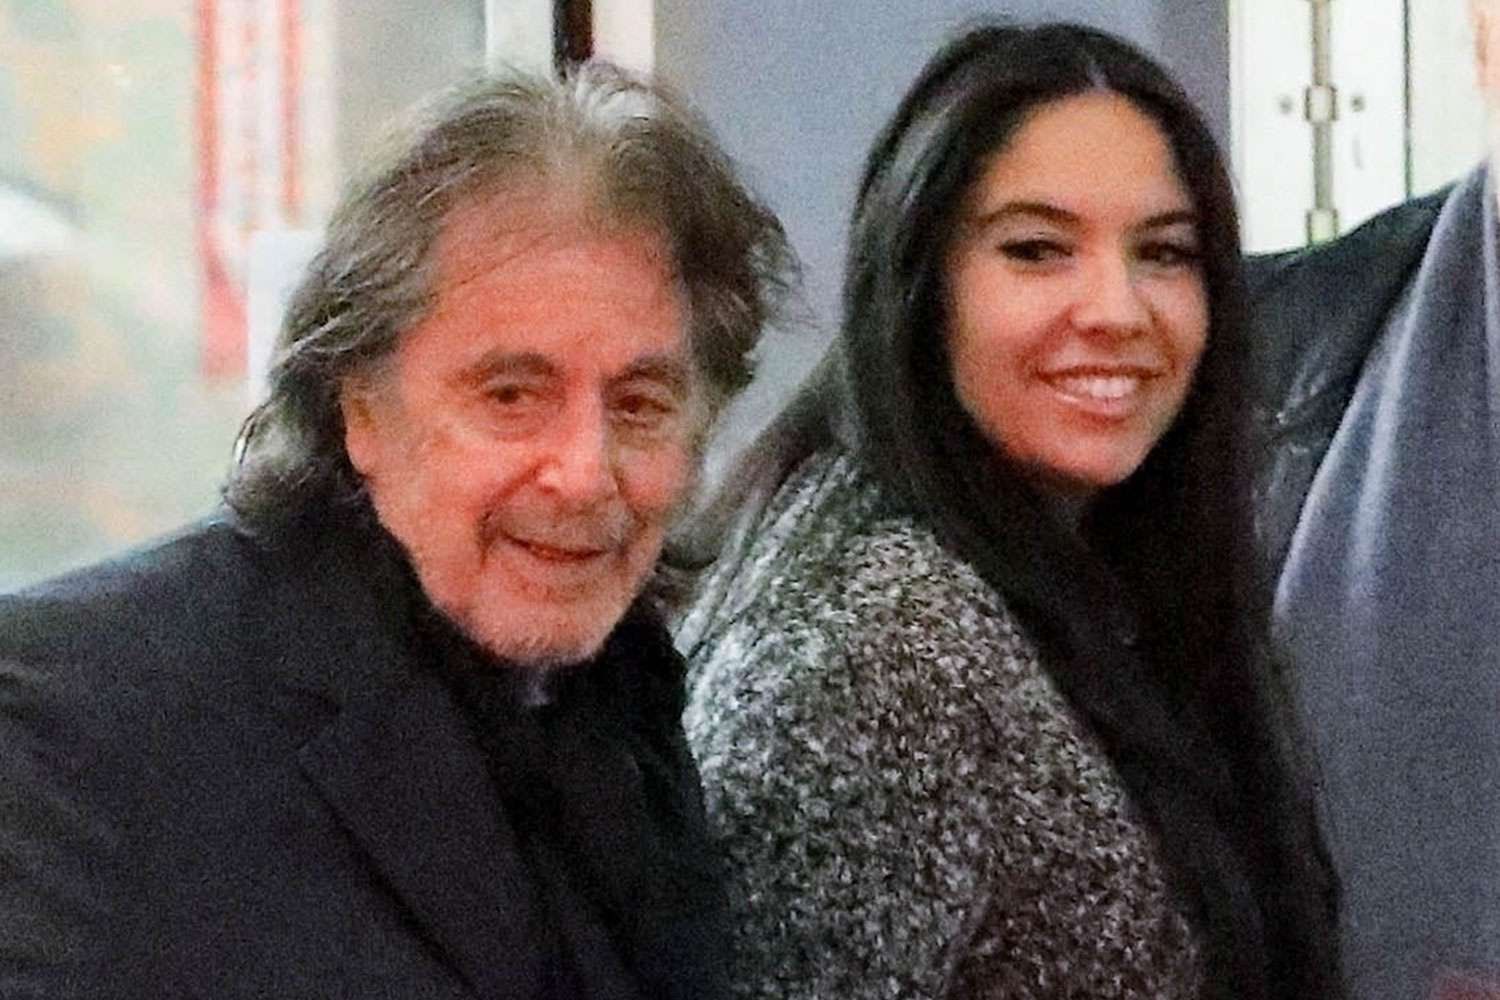 Al Pacino becomes father at 83 as Noor Alfallah confirms she has given birth to actor’s child